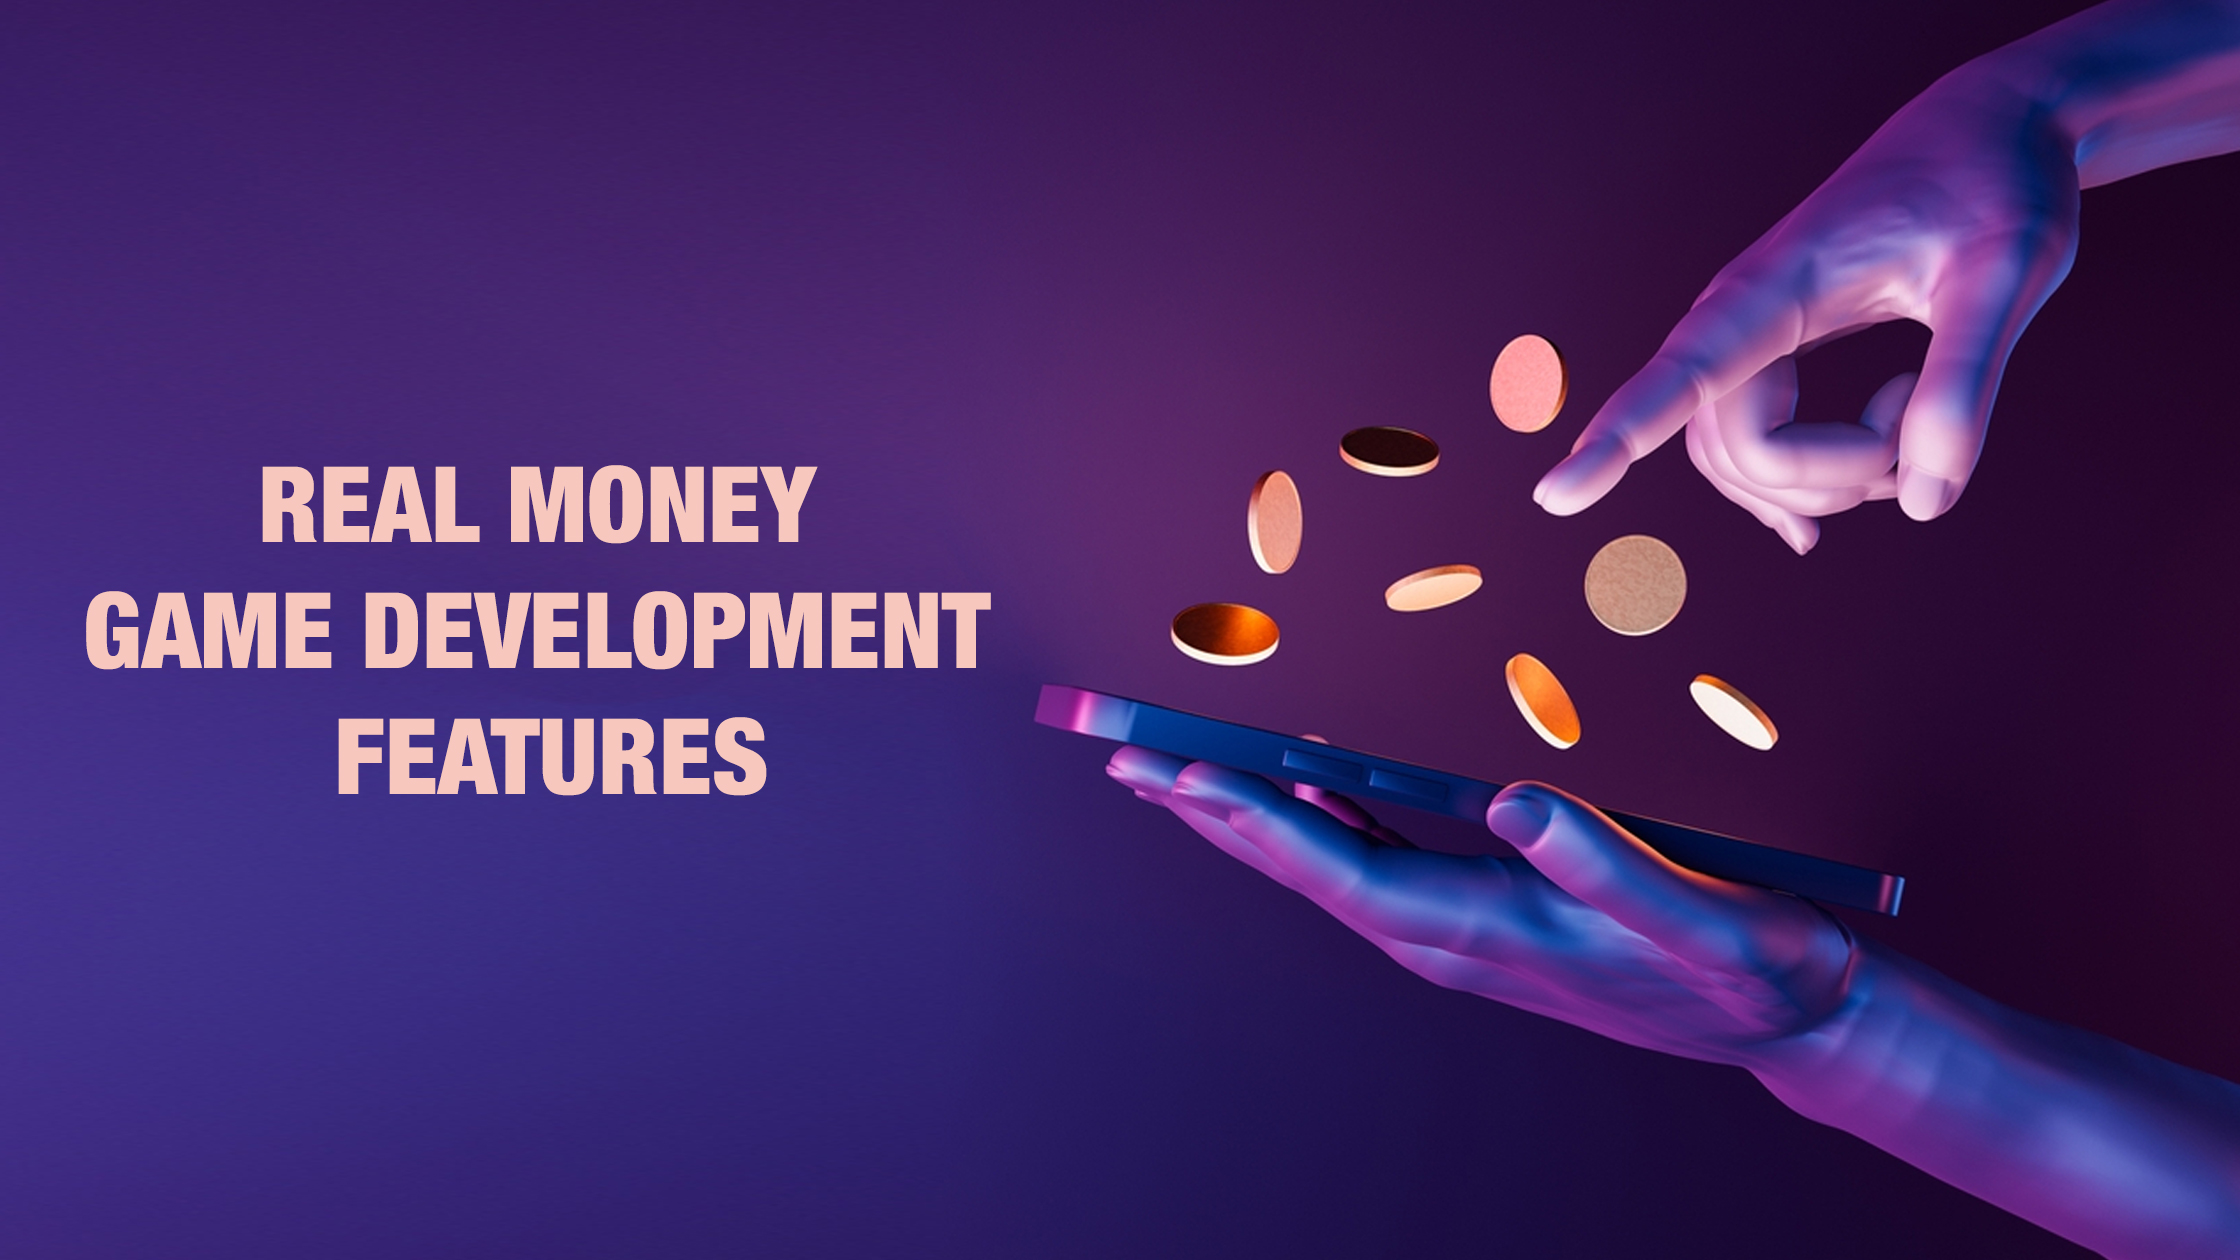 Real Money Game Development Features